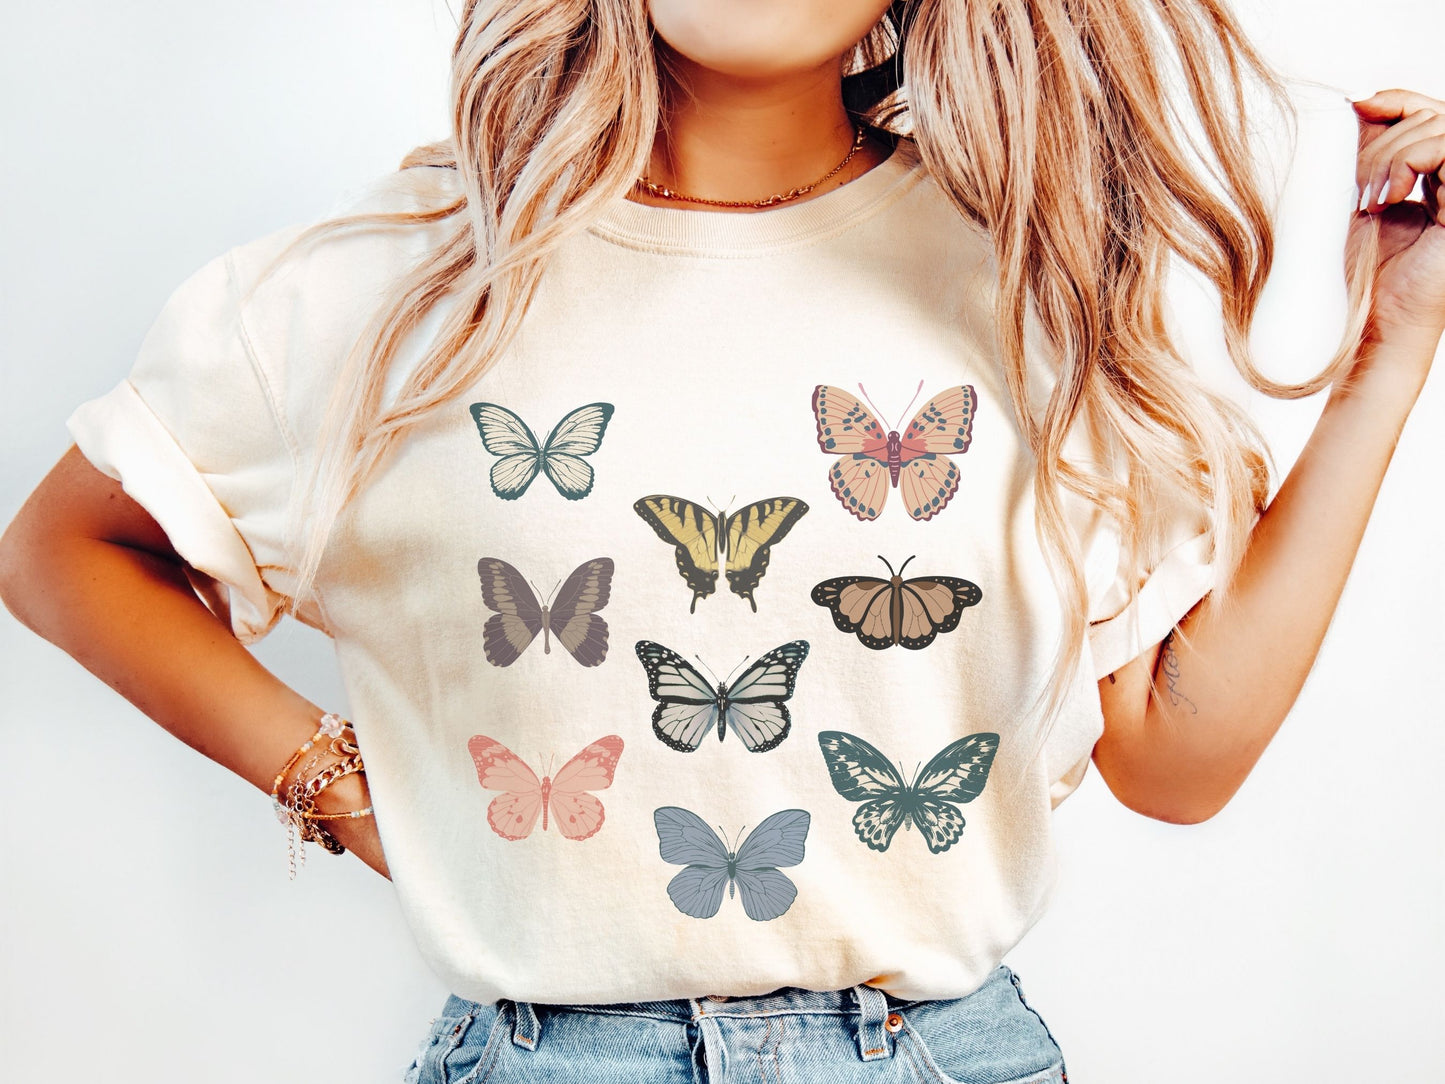 The Vintage Butterfly T-Shirt